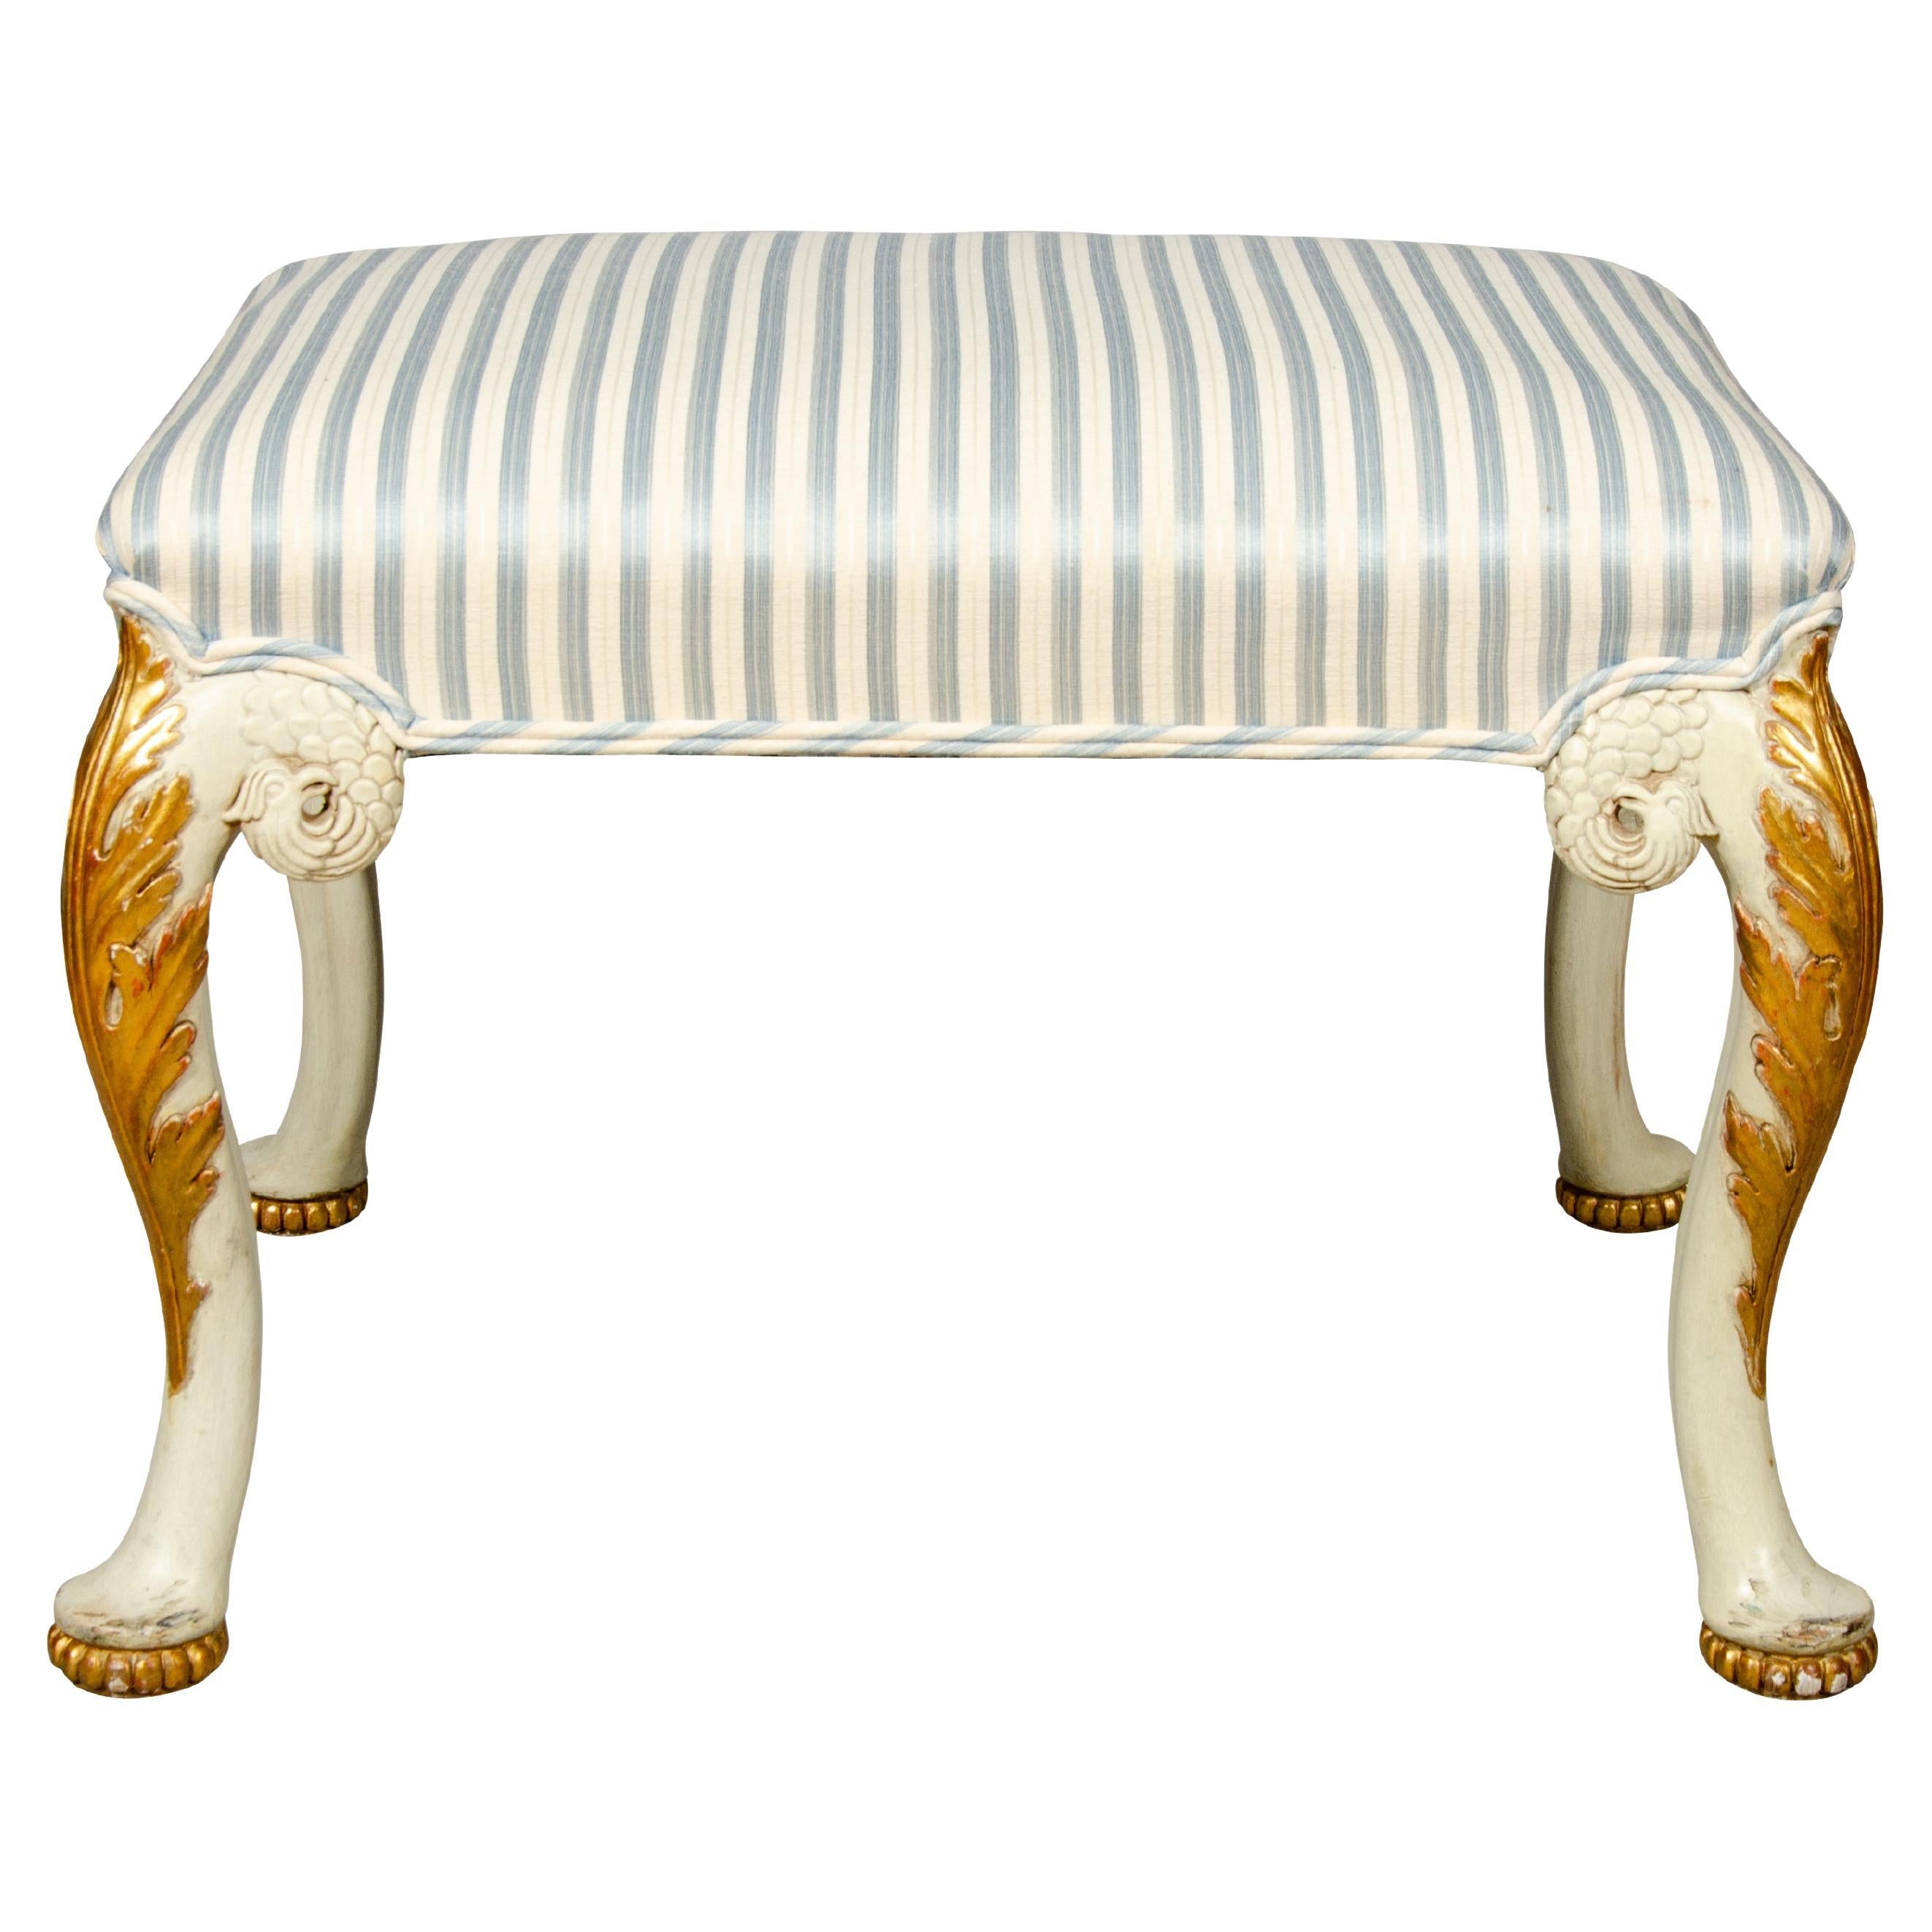 George I Style Painted and Gilded Bench